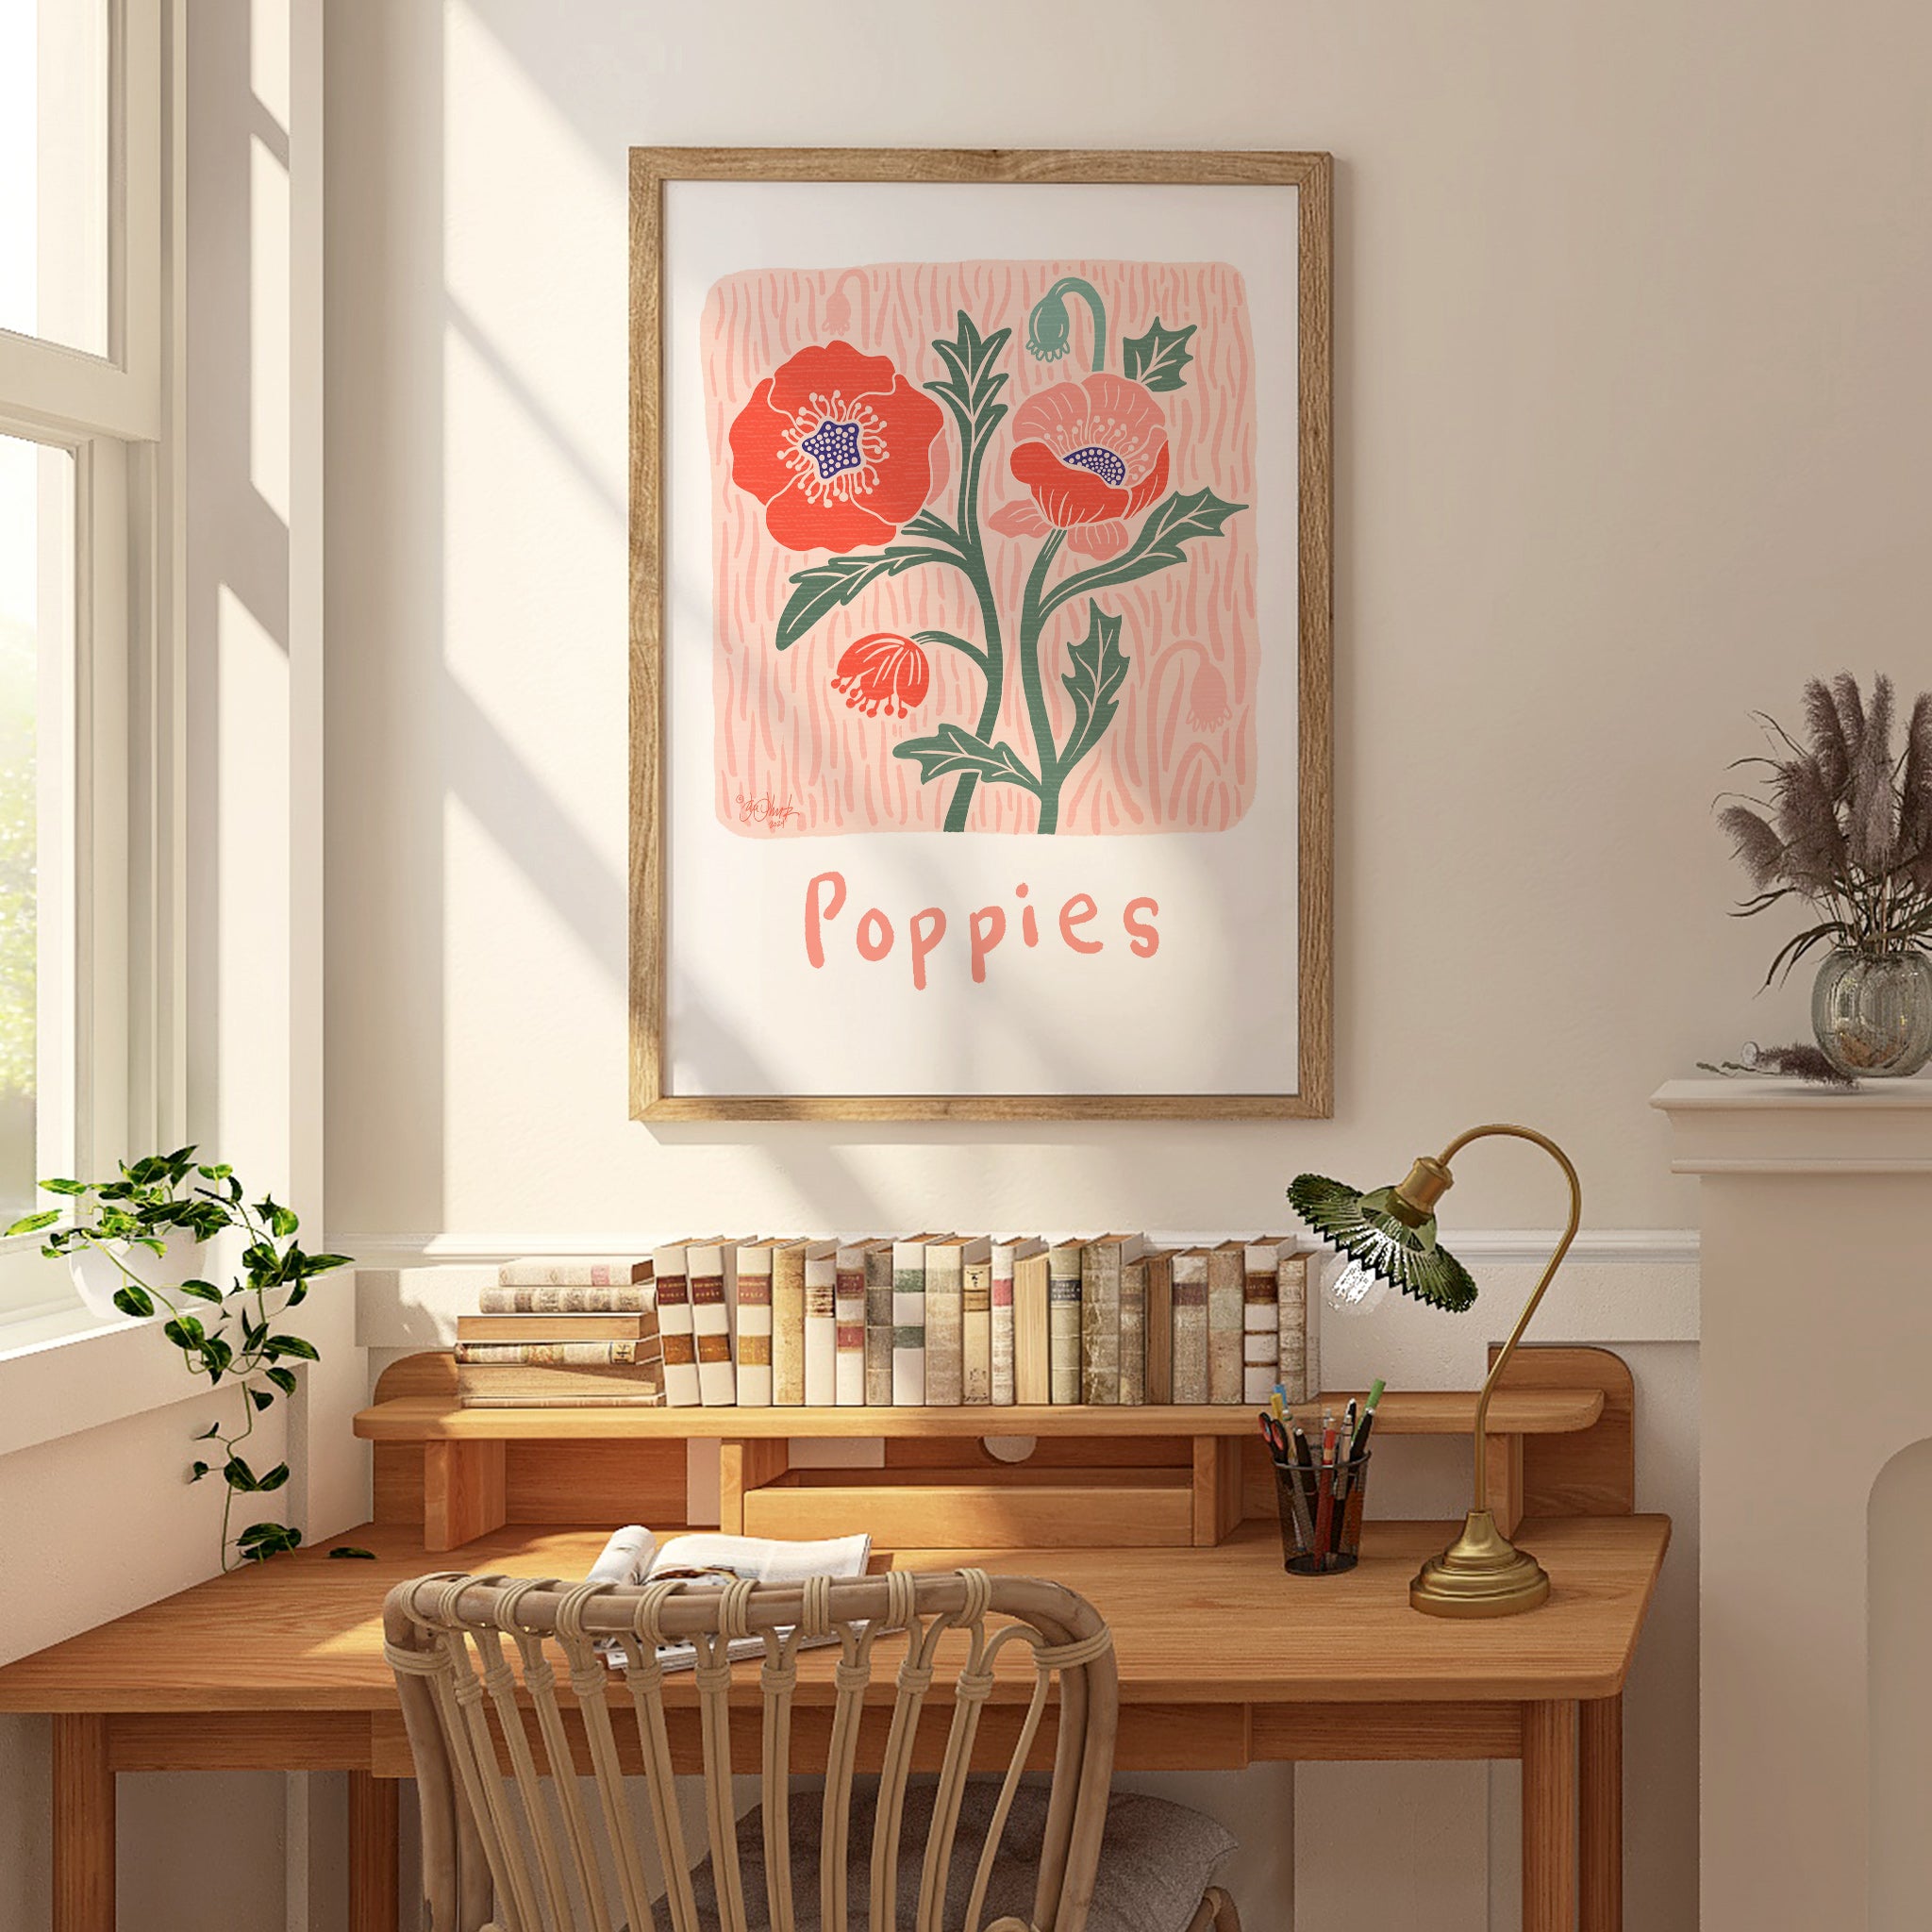 Pretty Poppies Giclee Print Framed Example - All art is unframed